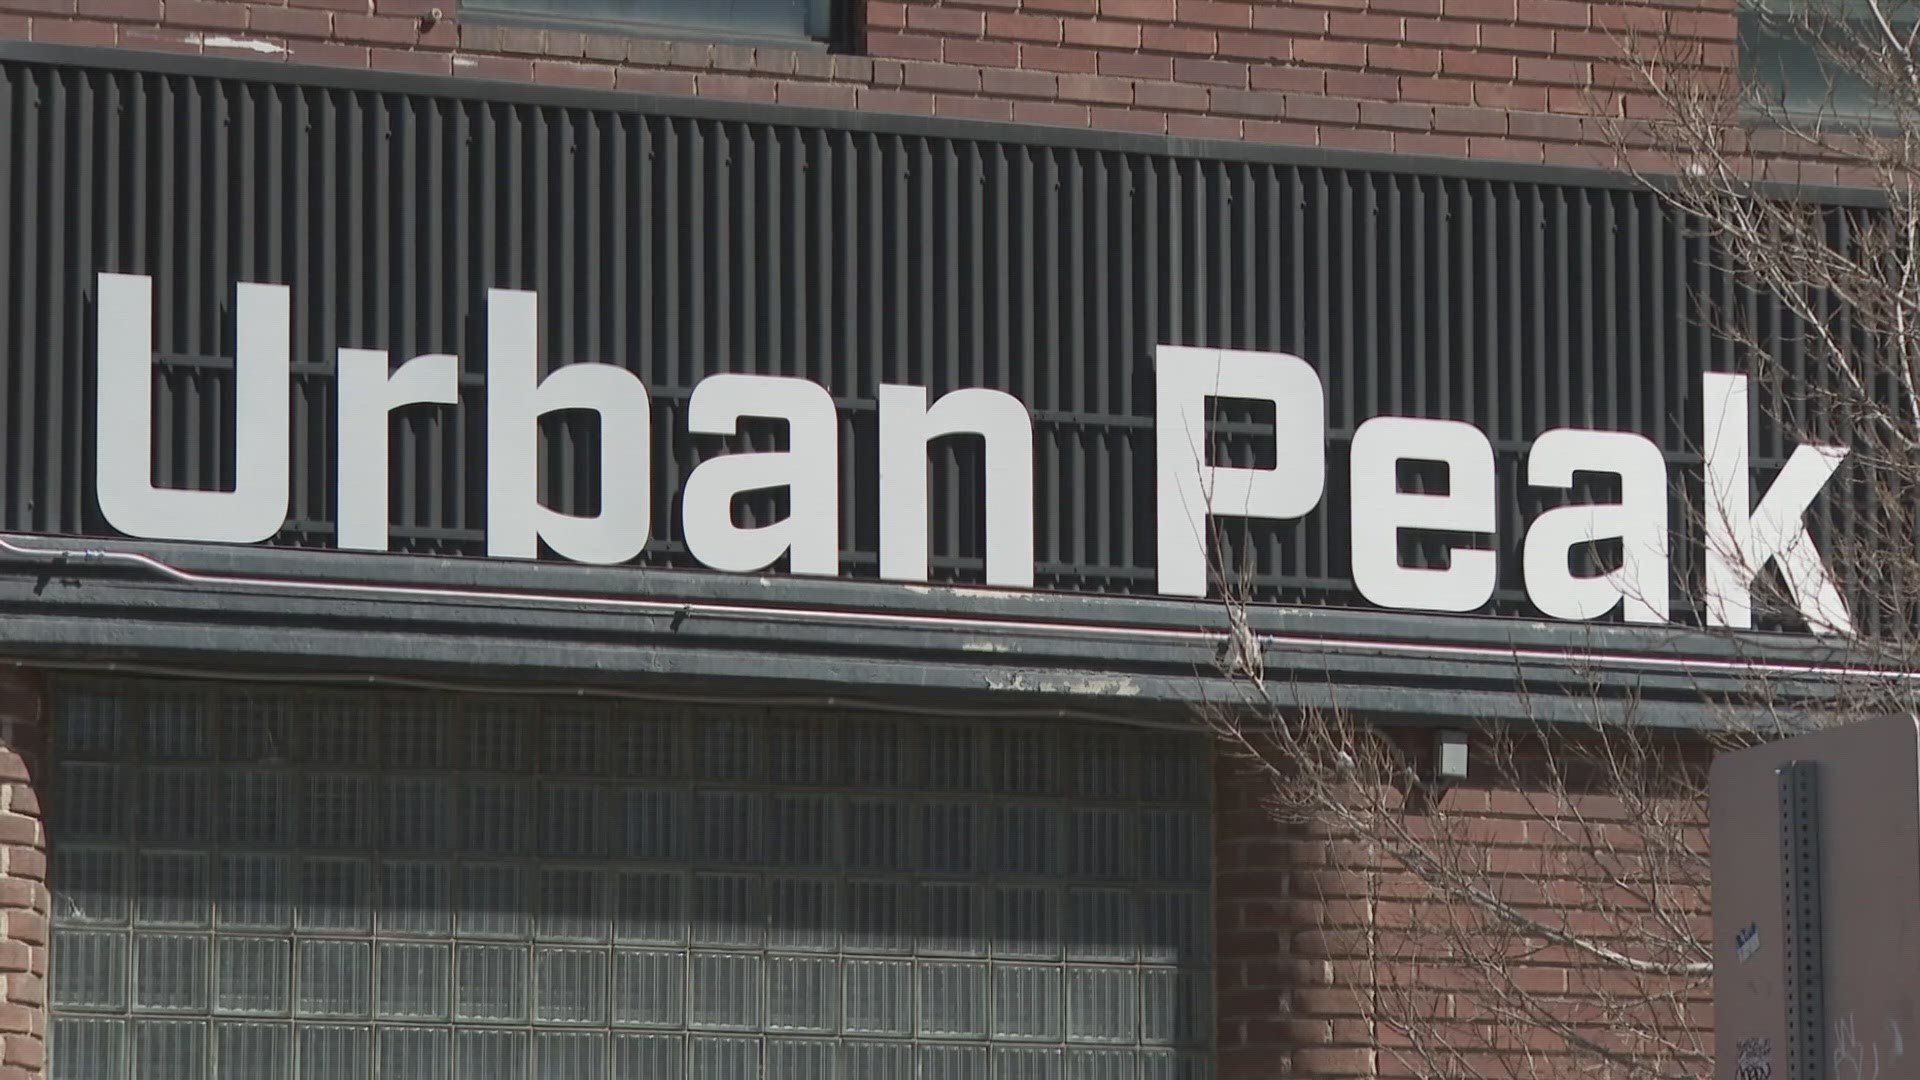 Workers at Urban Peak unionized over a lack of management support on things like mental health, sick leave and other policies.